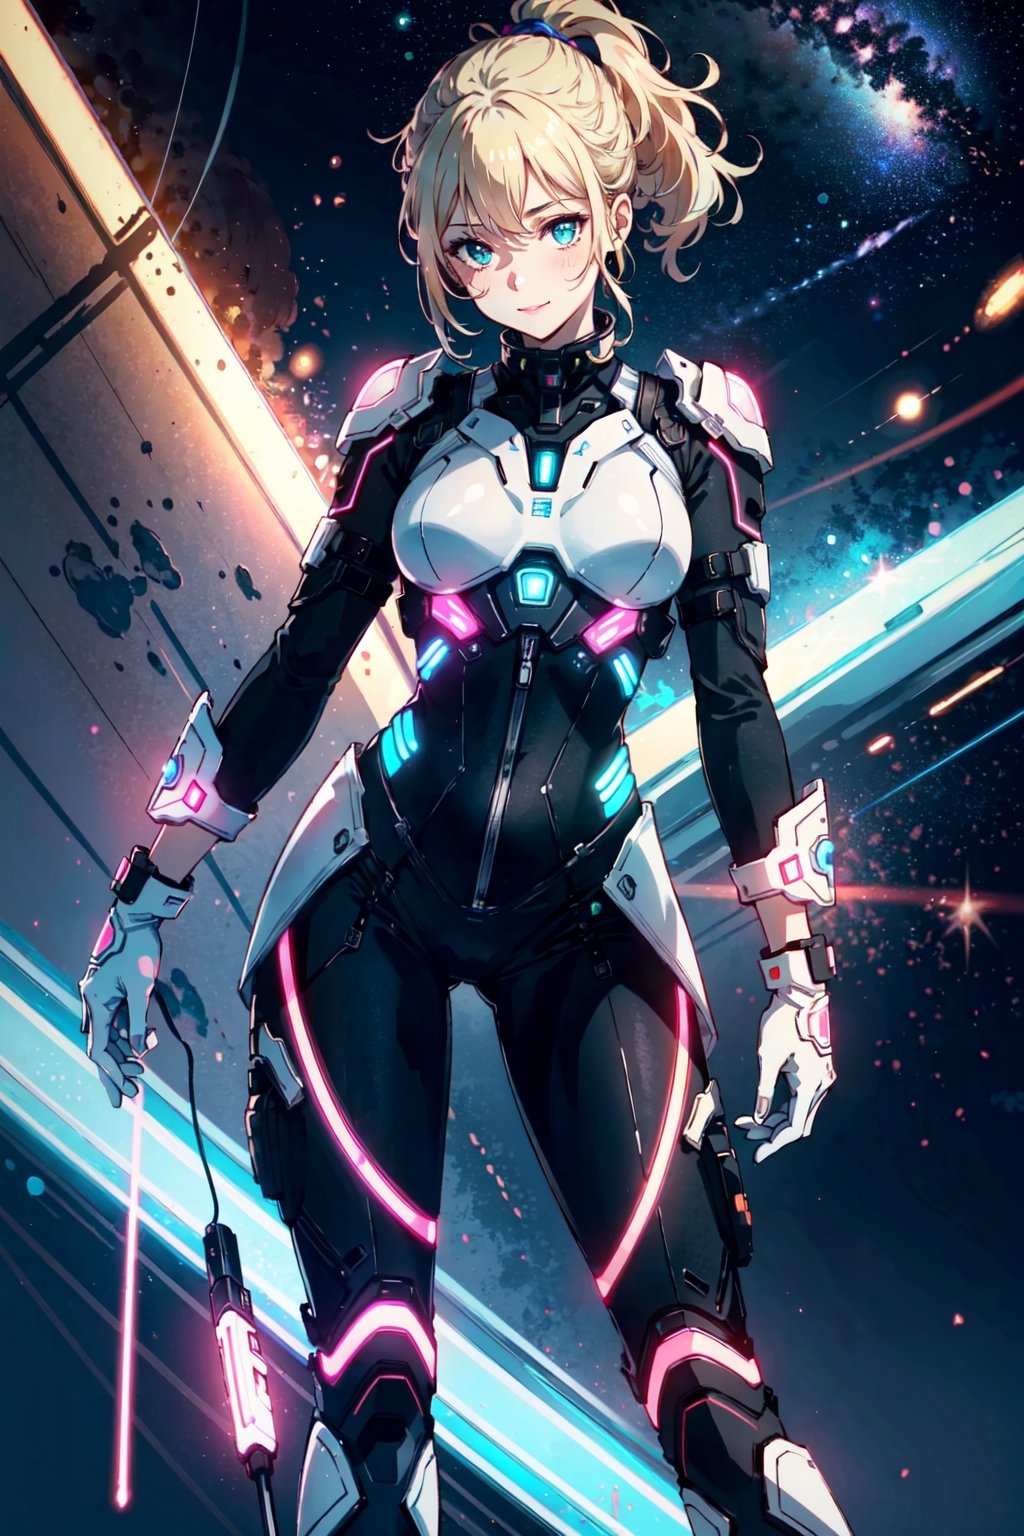 (erotic, bodysuit, elegant, aesthetic, exquisite, futuristic, cosmic, full_body),

blush, smile, green-eyes, blonde-ponytail, lipstick, gloves, pussy, covered-nipples,

starry-background, (outer space, stars), orbital, light-particles, (neon lights:1.3),

white, orange, pink, (violet), red, purple, lime, vanilla, porcelain, azure, enhanced colors, bokeh, 35mm-lens, glowing light, neon illumination,

(masterpiece, best quality, perfect visual), 8K, HDR, sharp image, professional artwork, detailed, intricate,